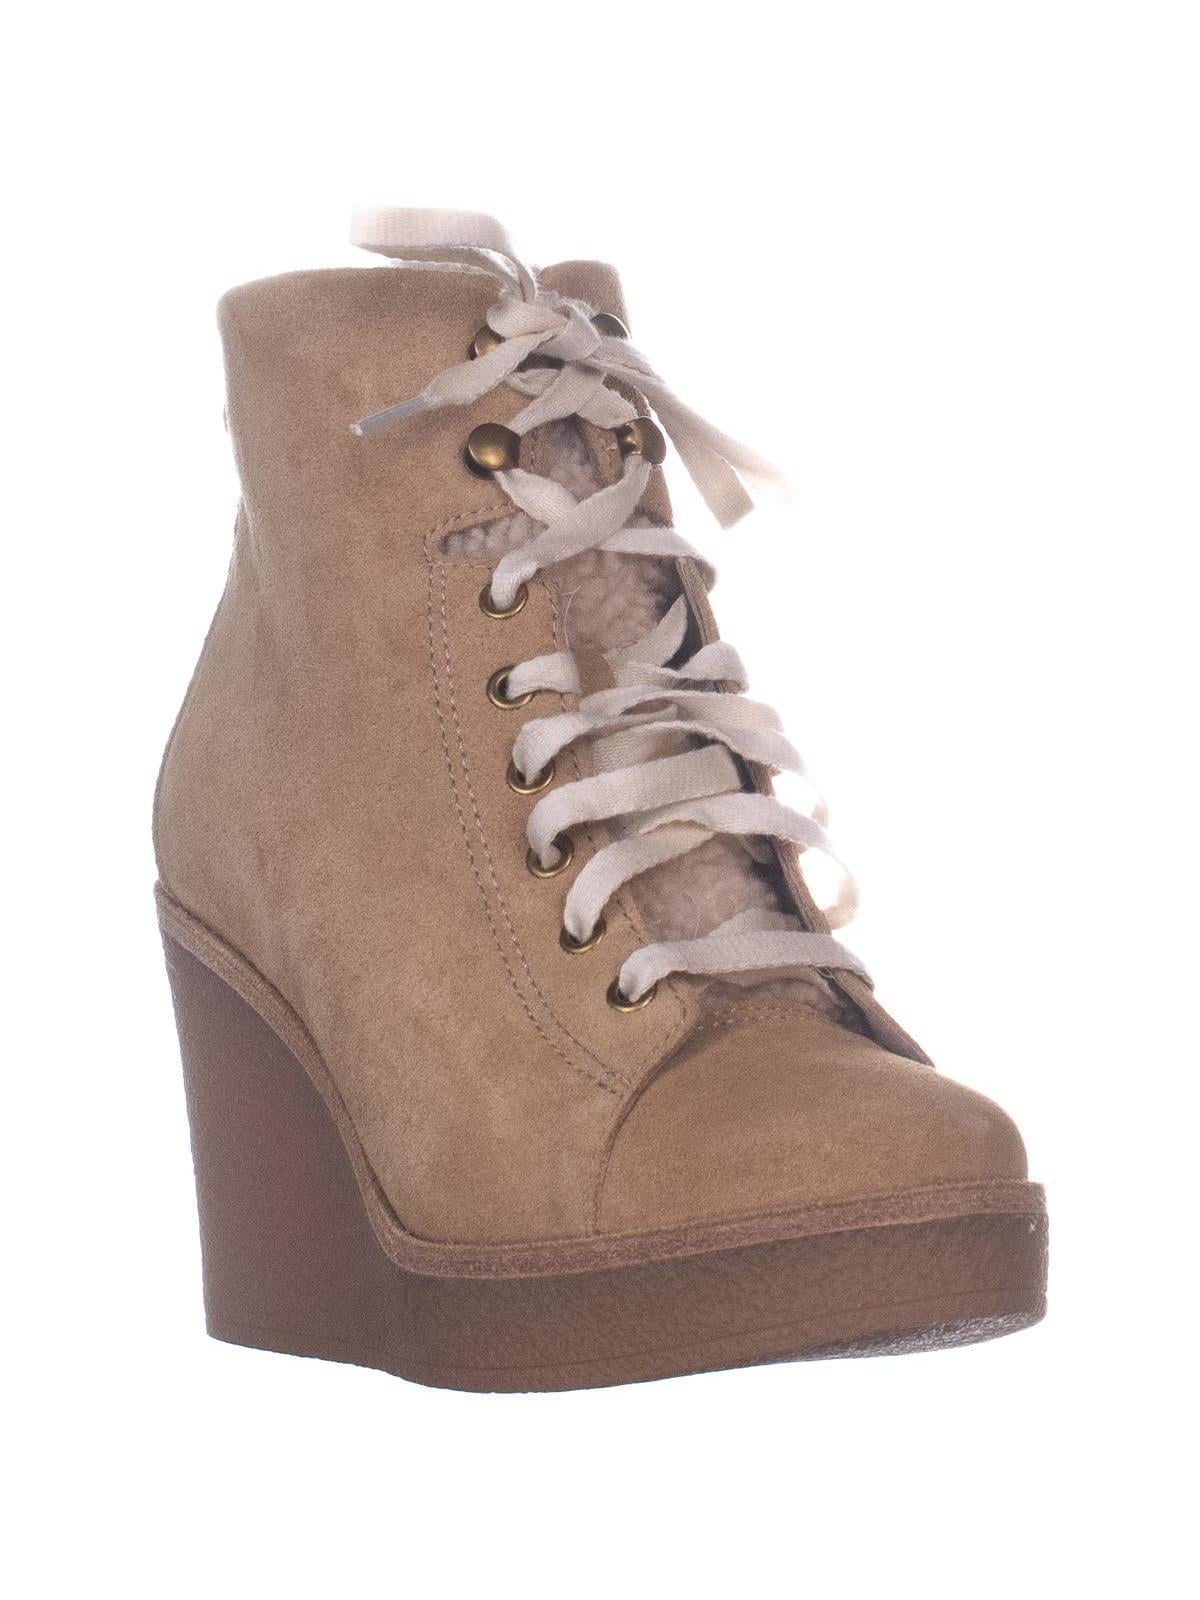 ugg wedge lace up boots